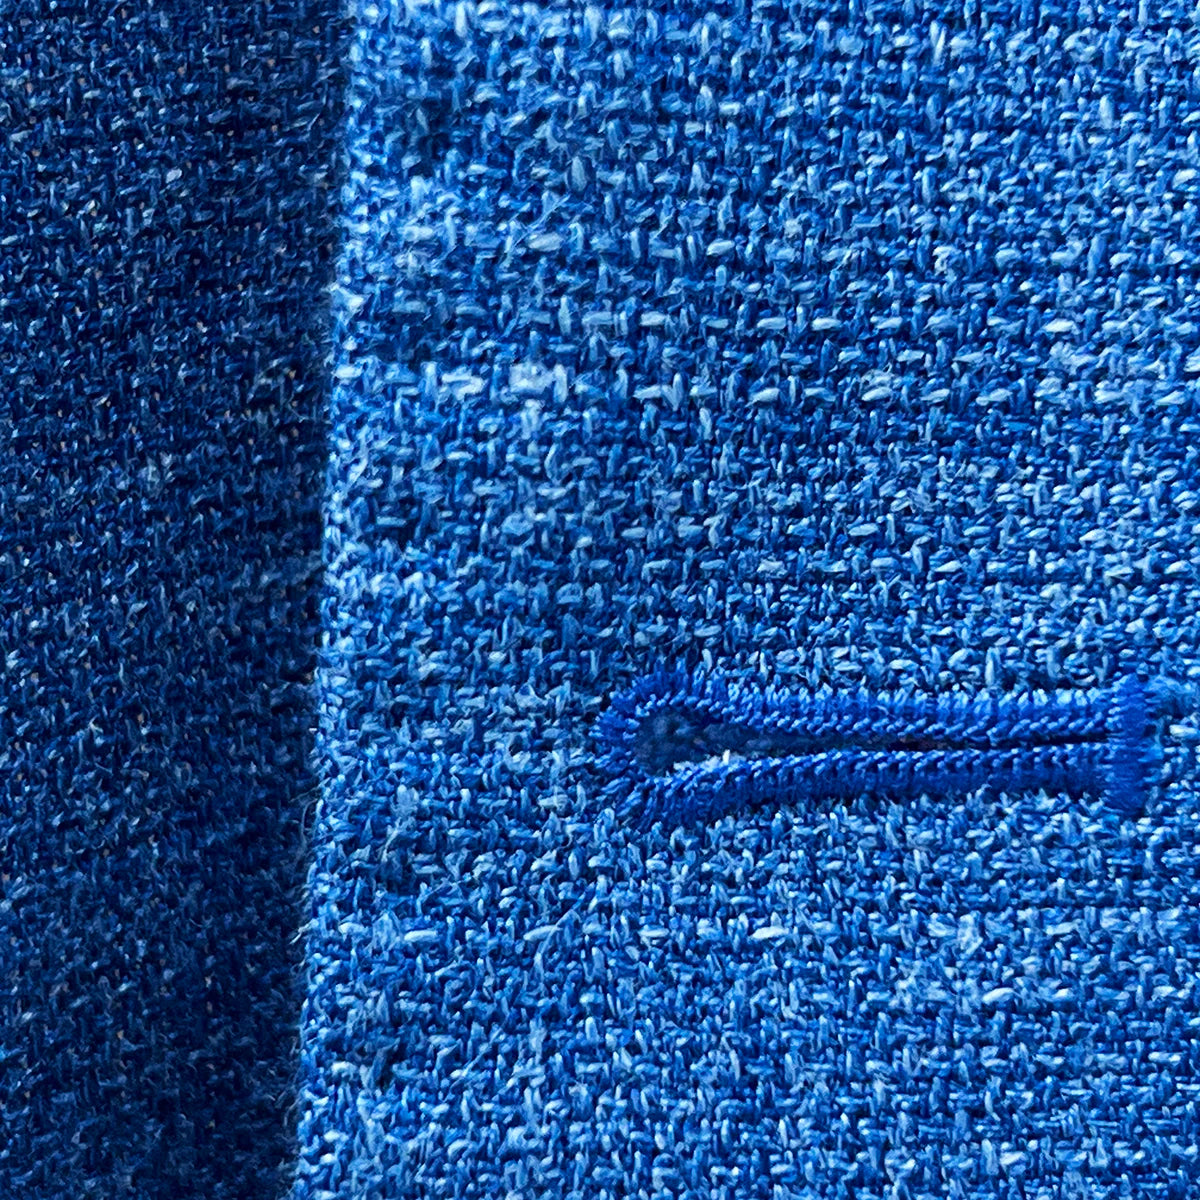 Close-up of the buttonhole stitching on the sportcoat, showing the precise matching pick stitching and fabric texture.